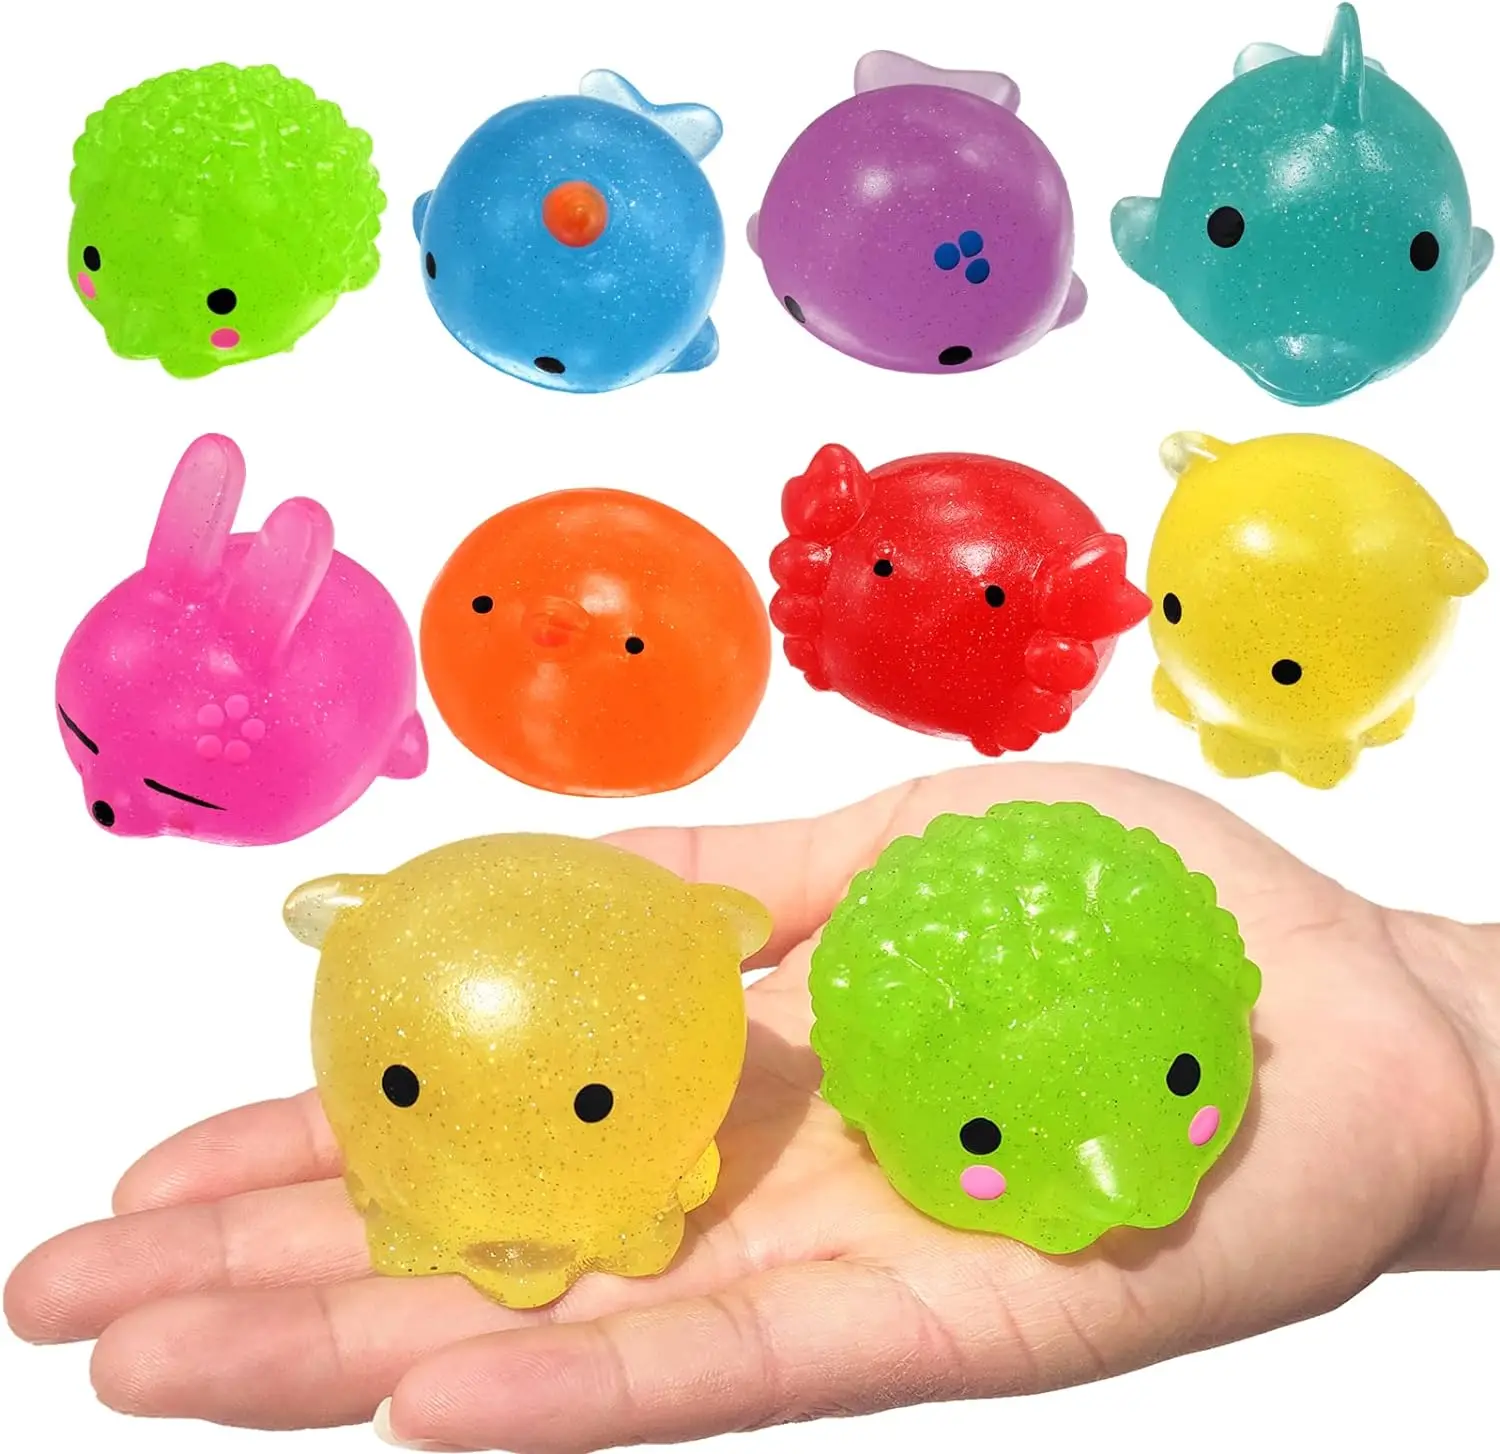 Jumbo Glitter Mochi Squishy Toys Animals Squishy Stress Reliever Kids Party Favors